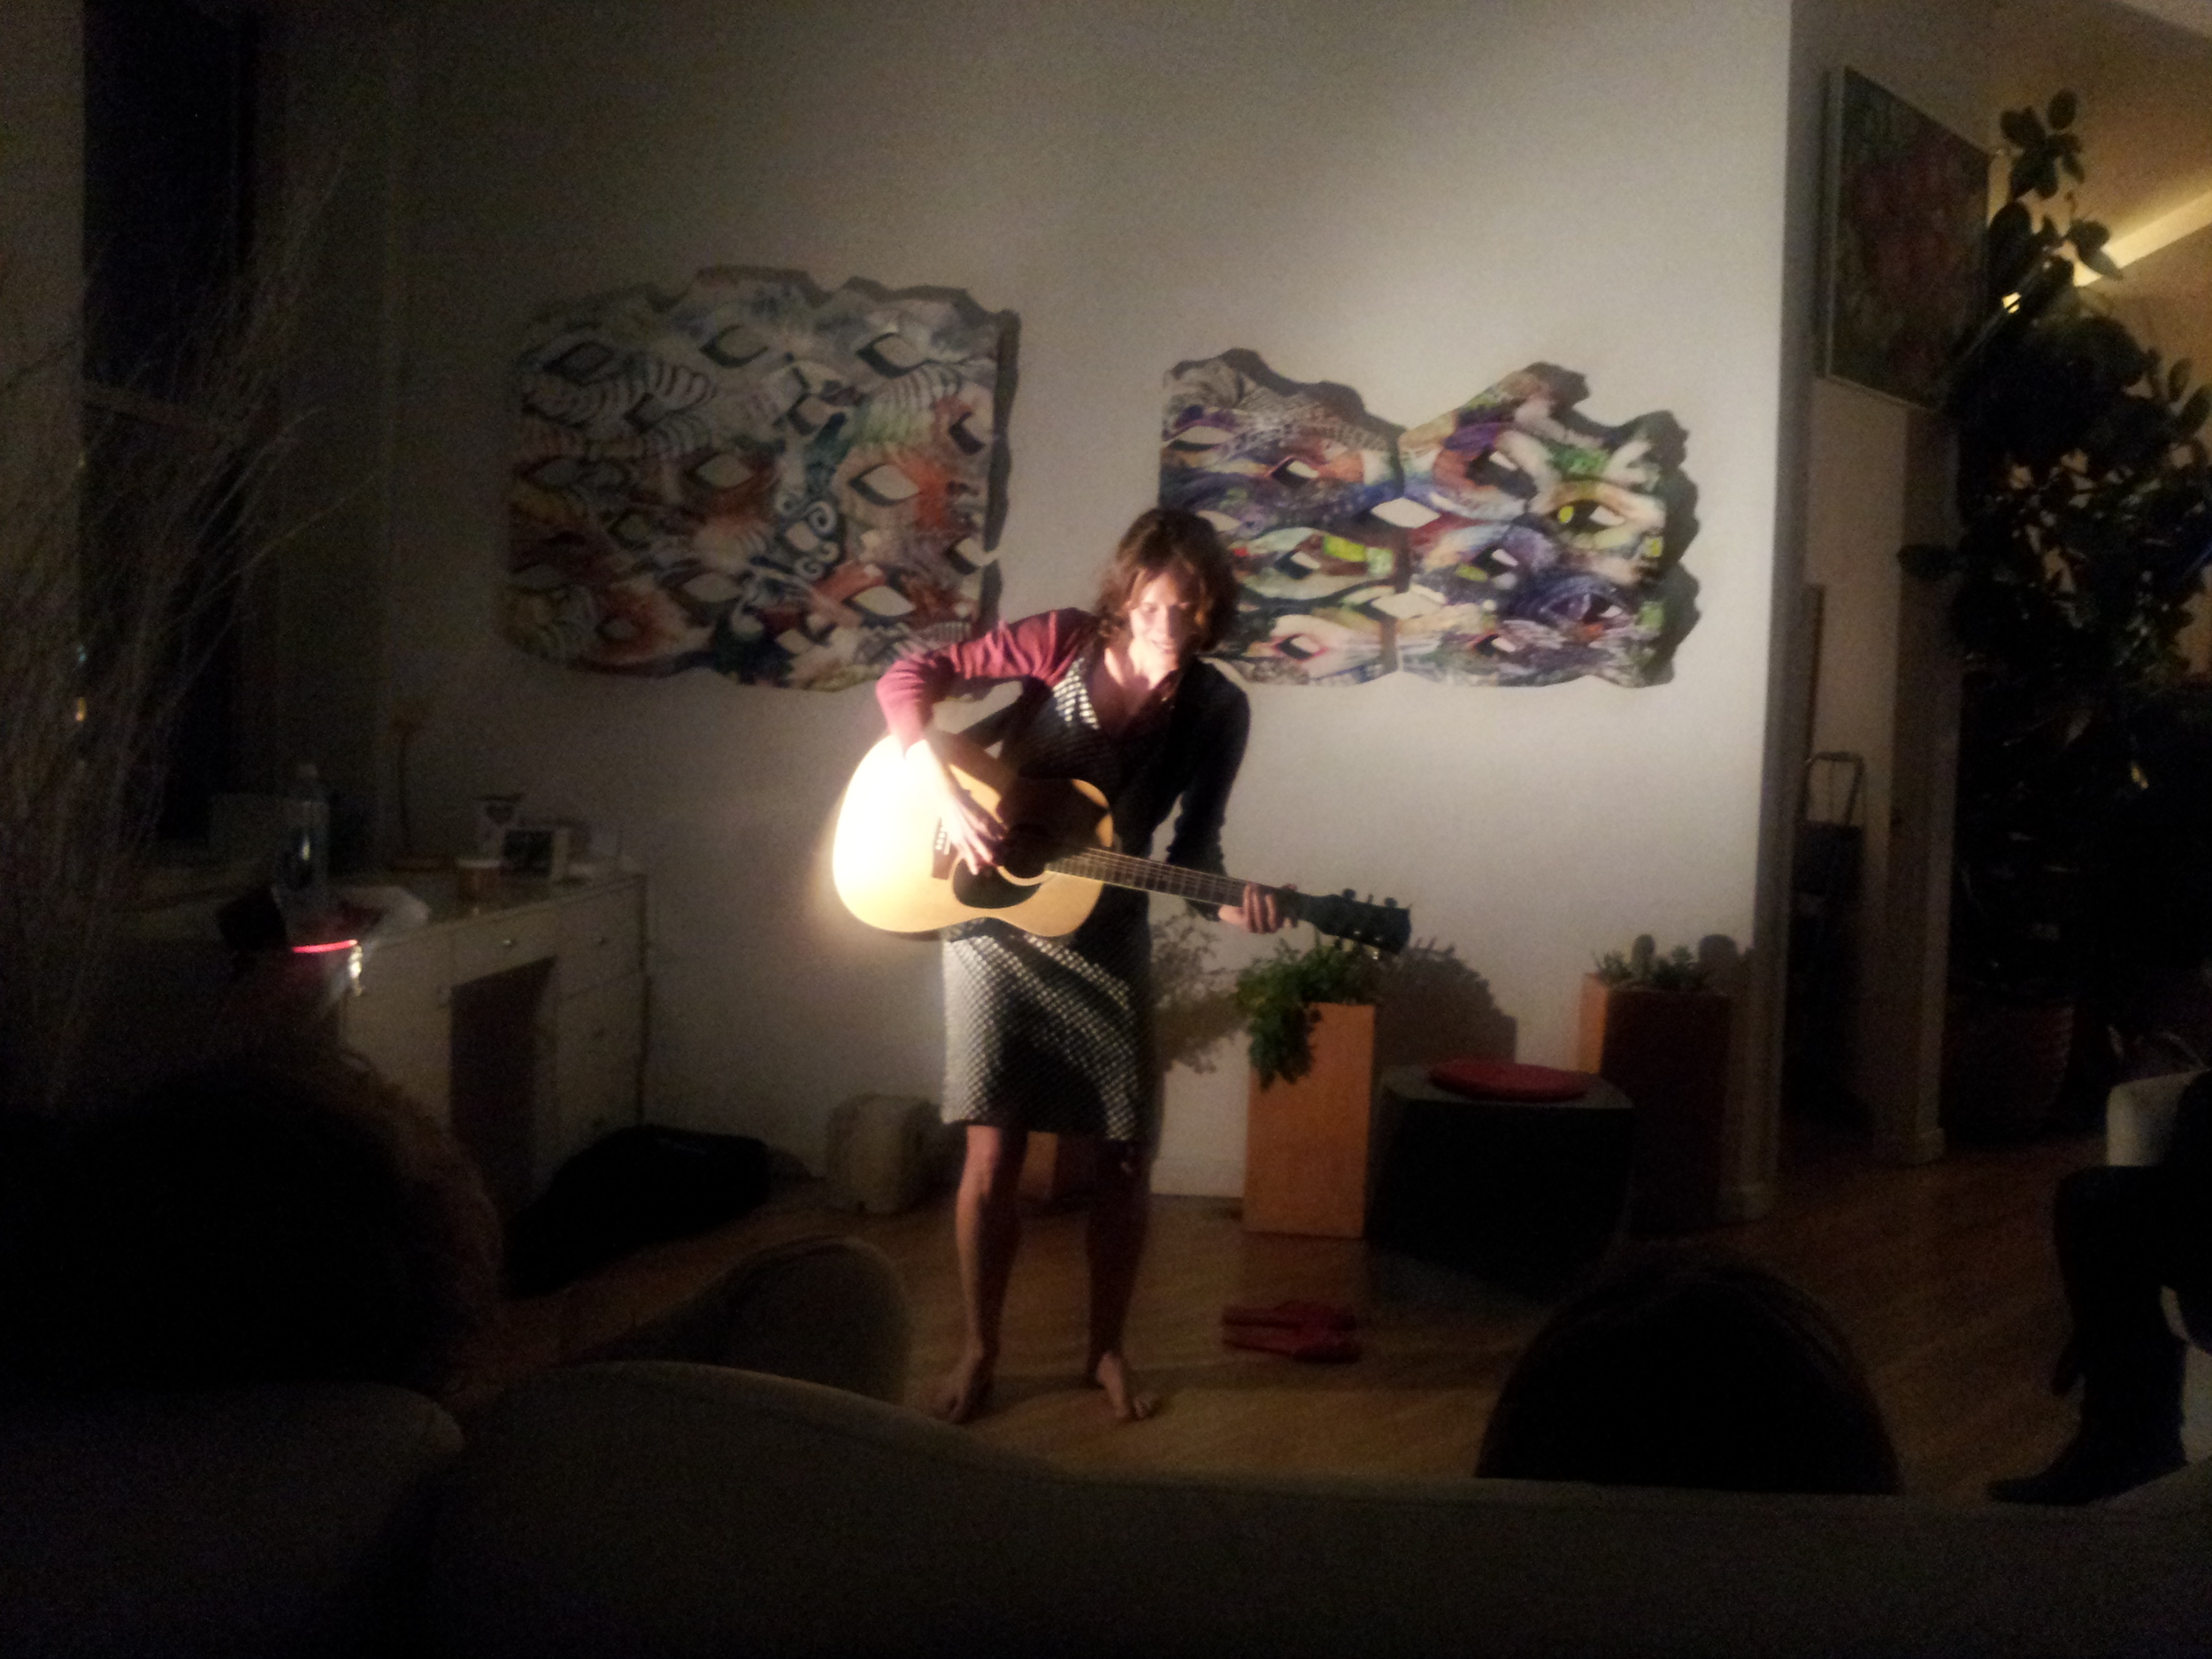 NYC House Concert, 10/9/14